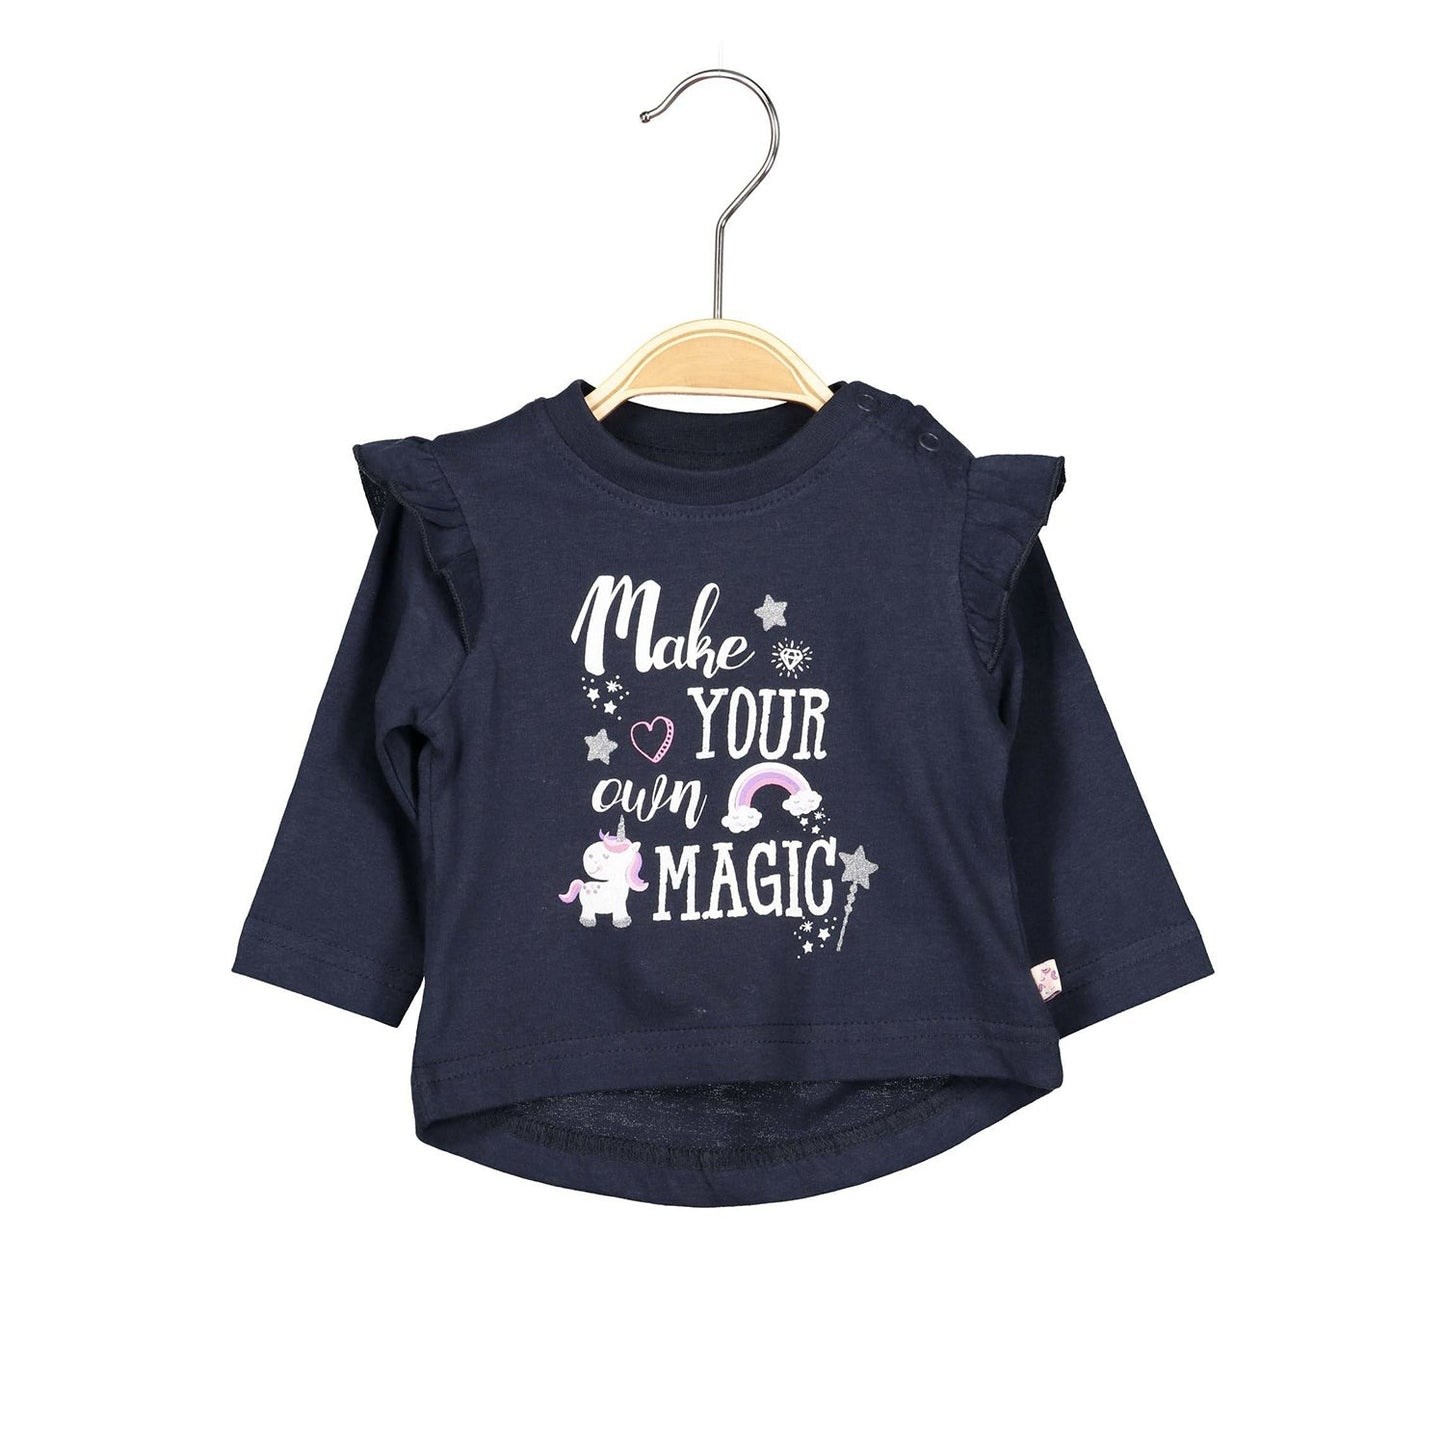 Blue Seven - Dark Blue Long Sleeves T-Shirt For Baby Girl LAST SIZE 3-6 MONTHS